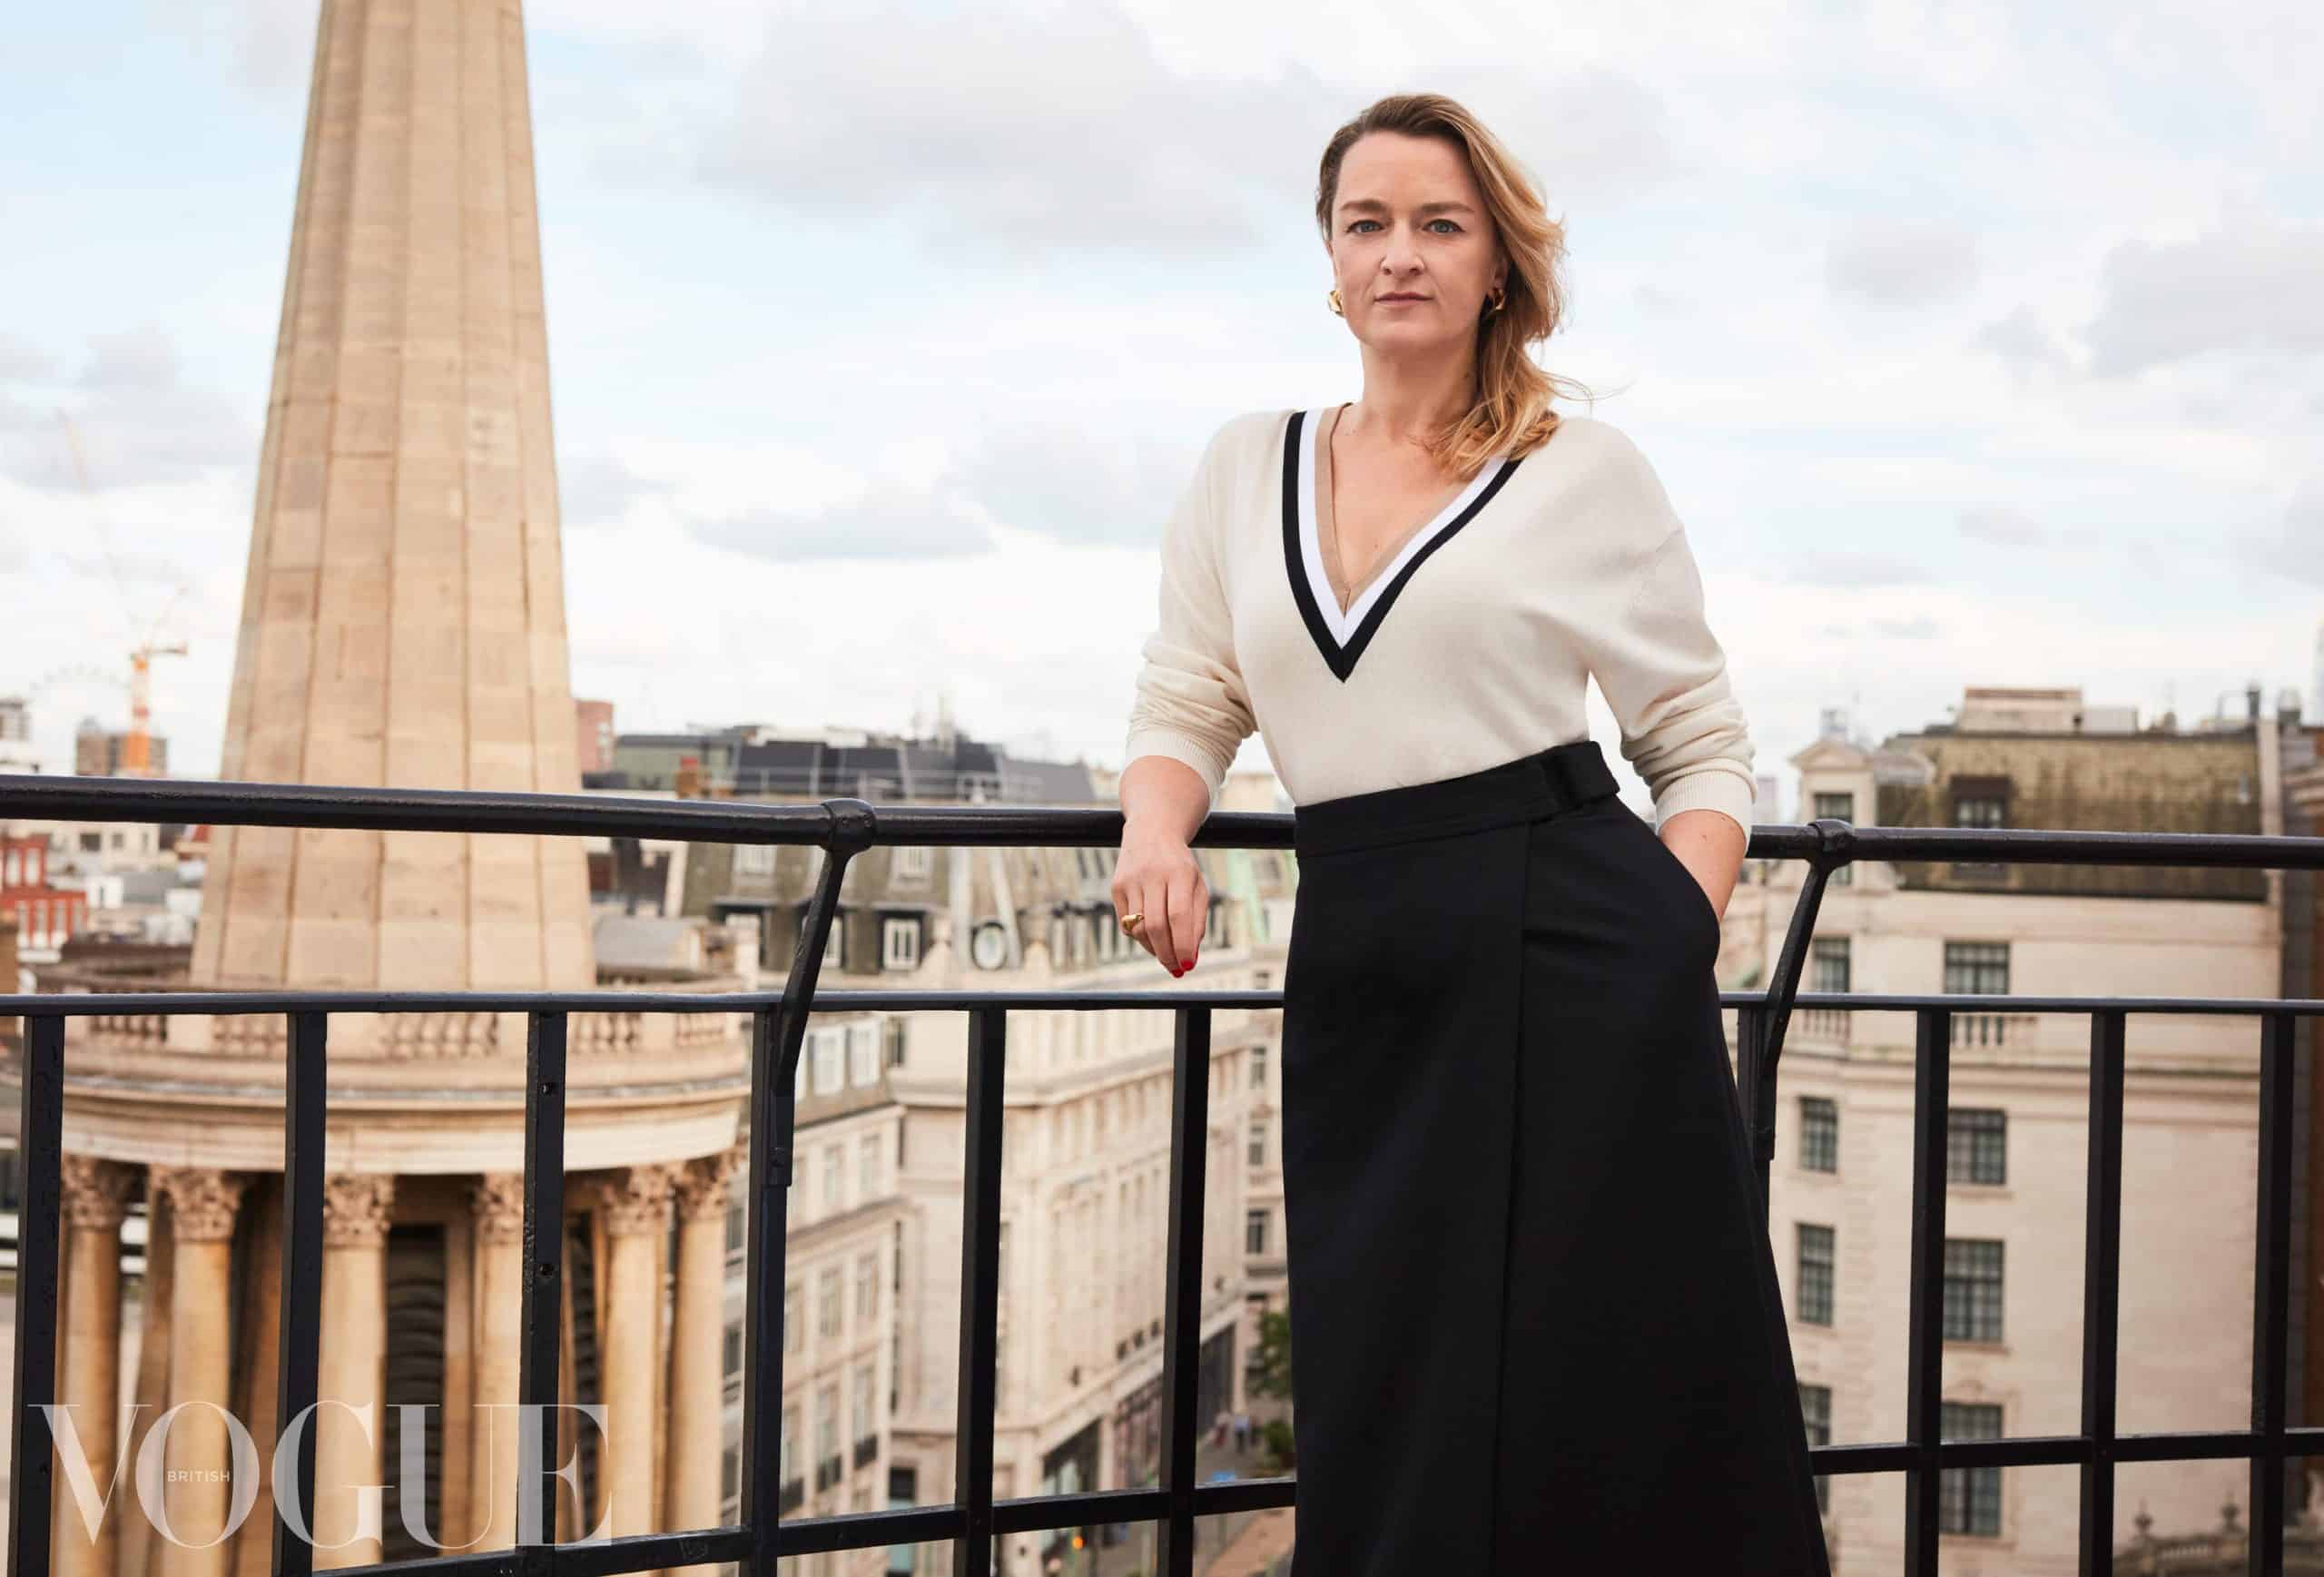 Laura Kuenssberg tells Vogue about ‘very hot, very wild’ Spectator party and online abuse at BBC